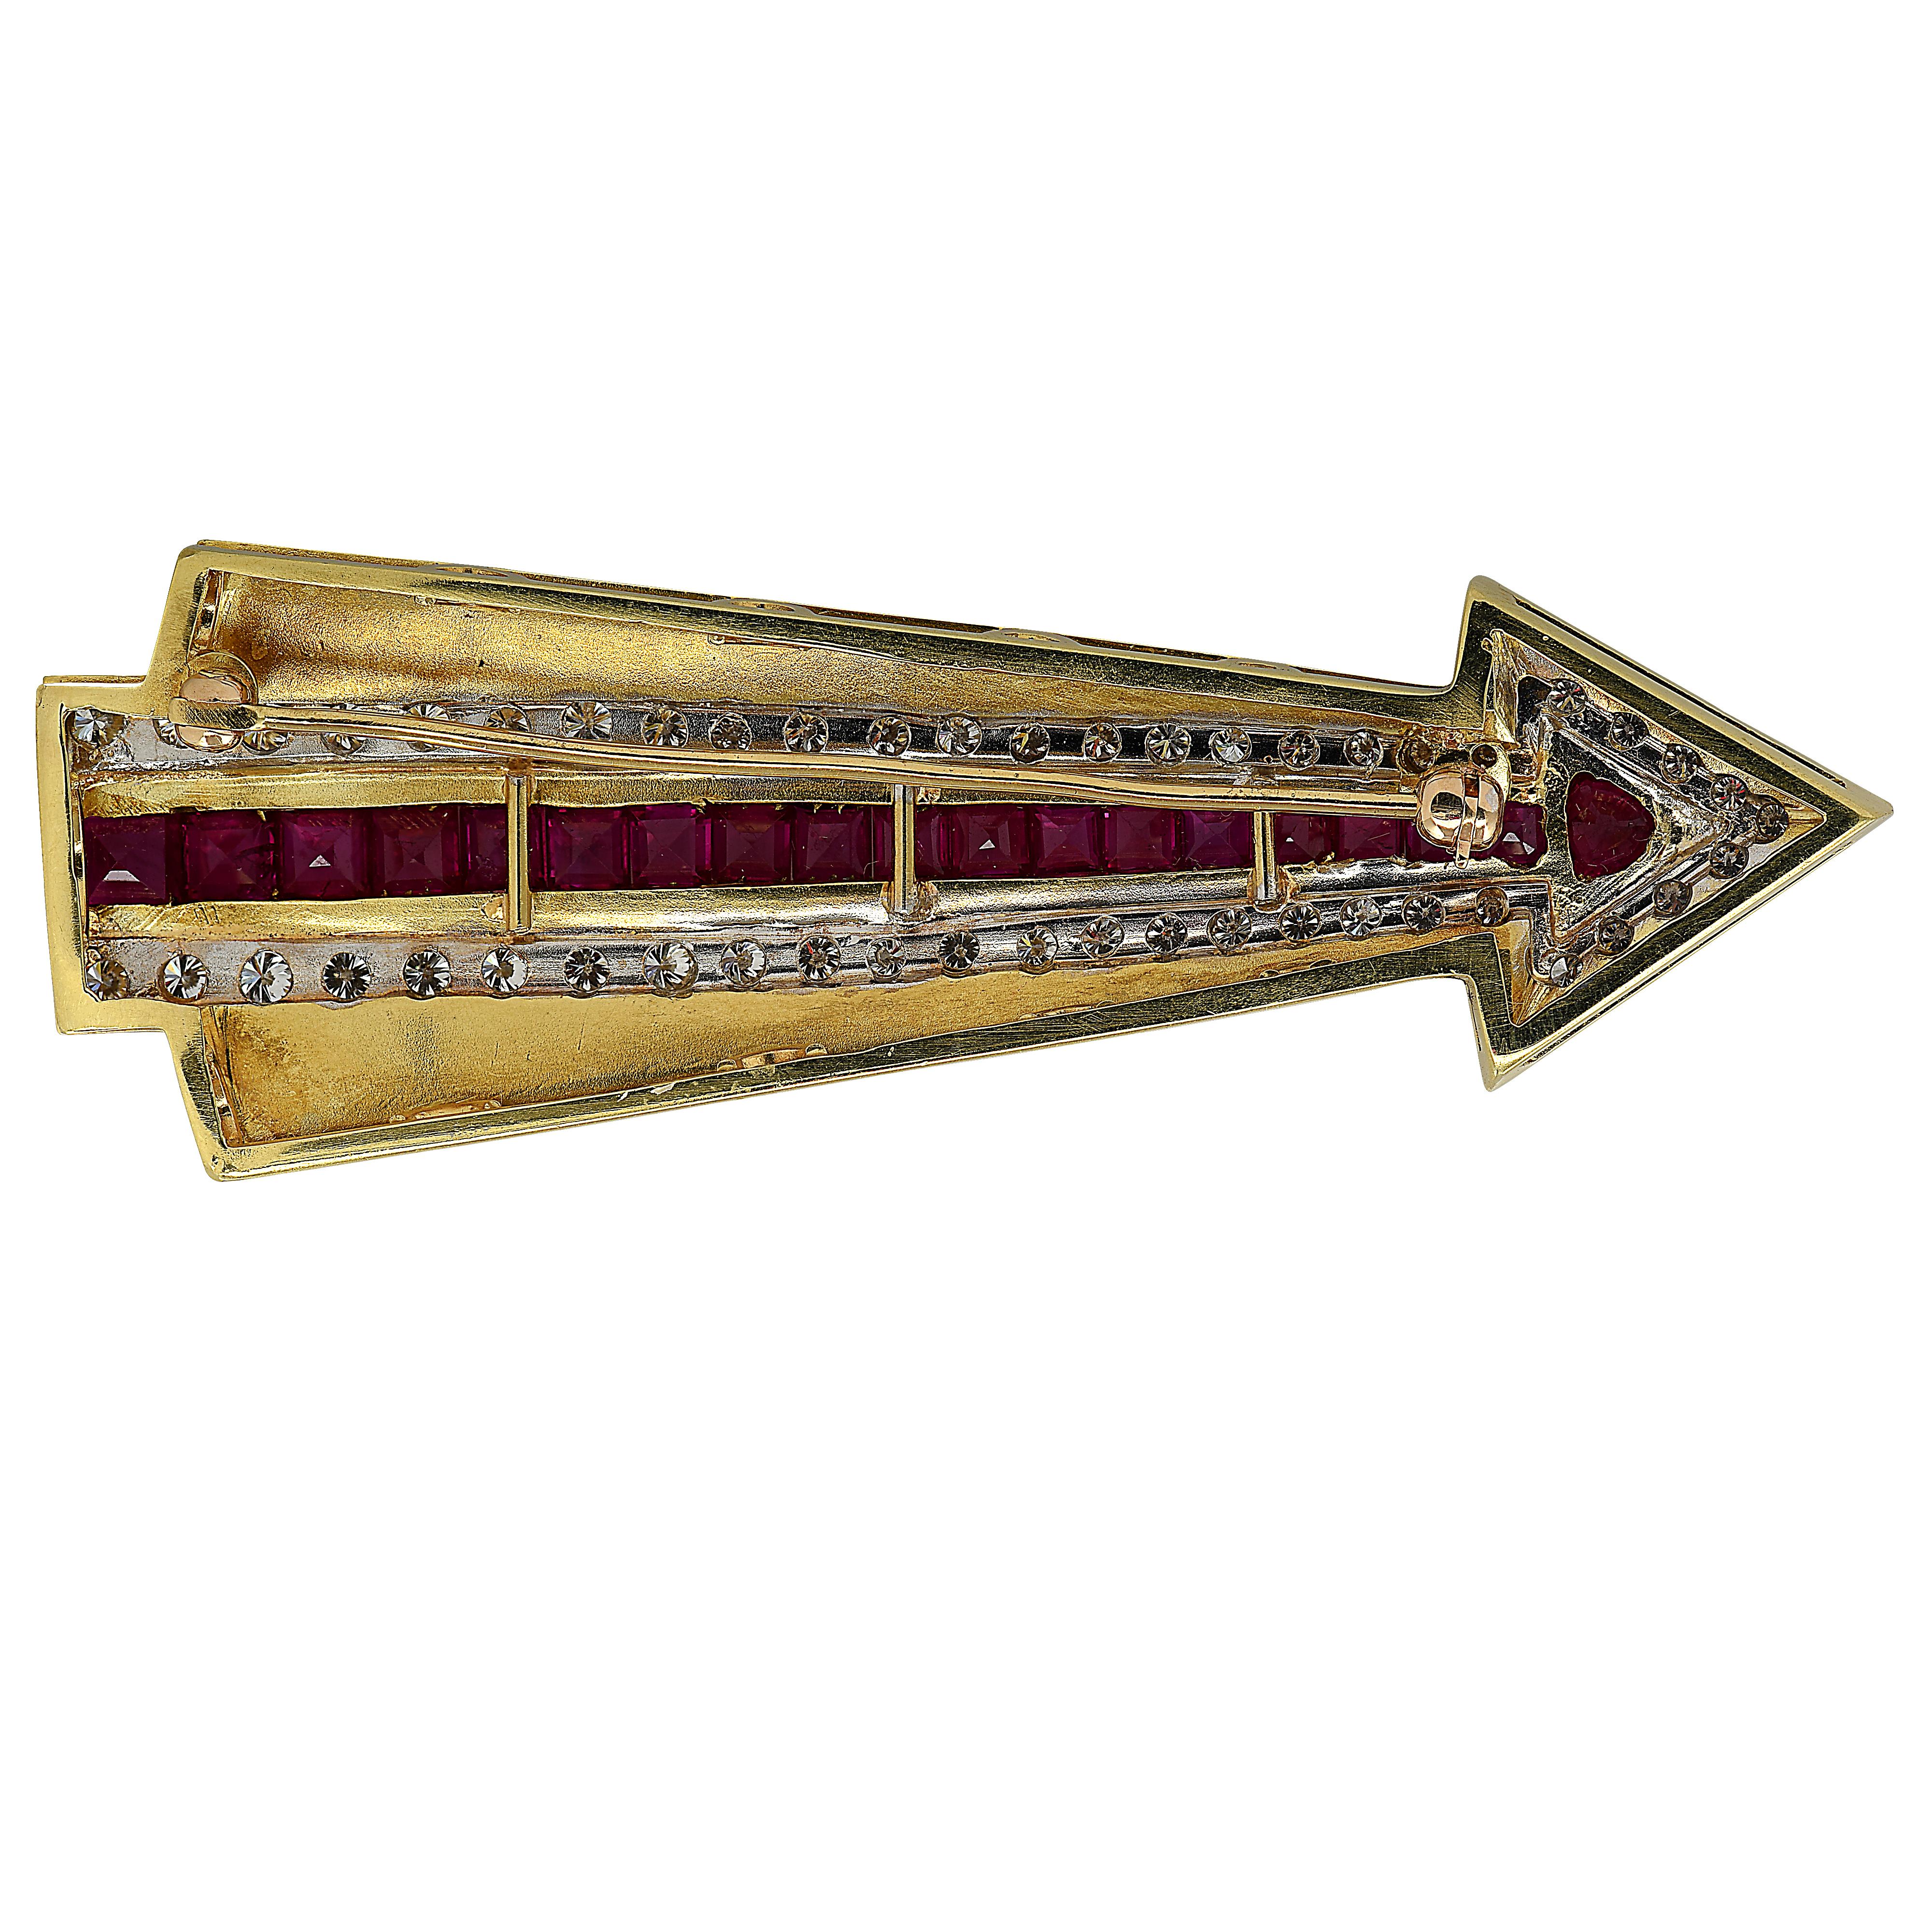 Striking arrow brooch pin crafted in 18 karat yellow and white gold, featuring 19 square cut rubies weighing approximately 2.15 carats total, and 49 round brilliant cut diamonds weighing approximately 2.2 carats total, G color, VS clarity. This